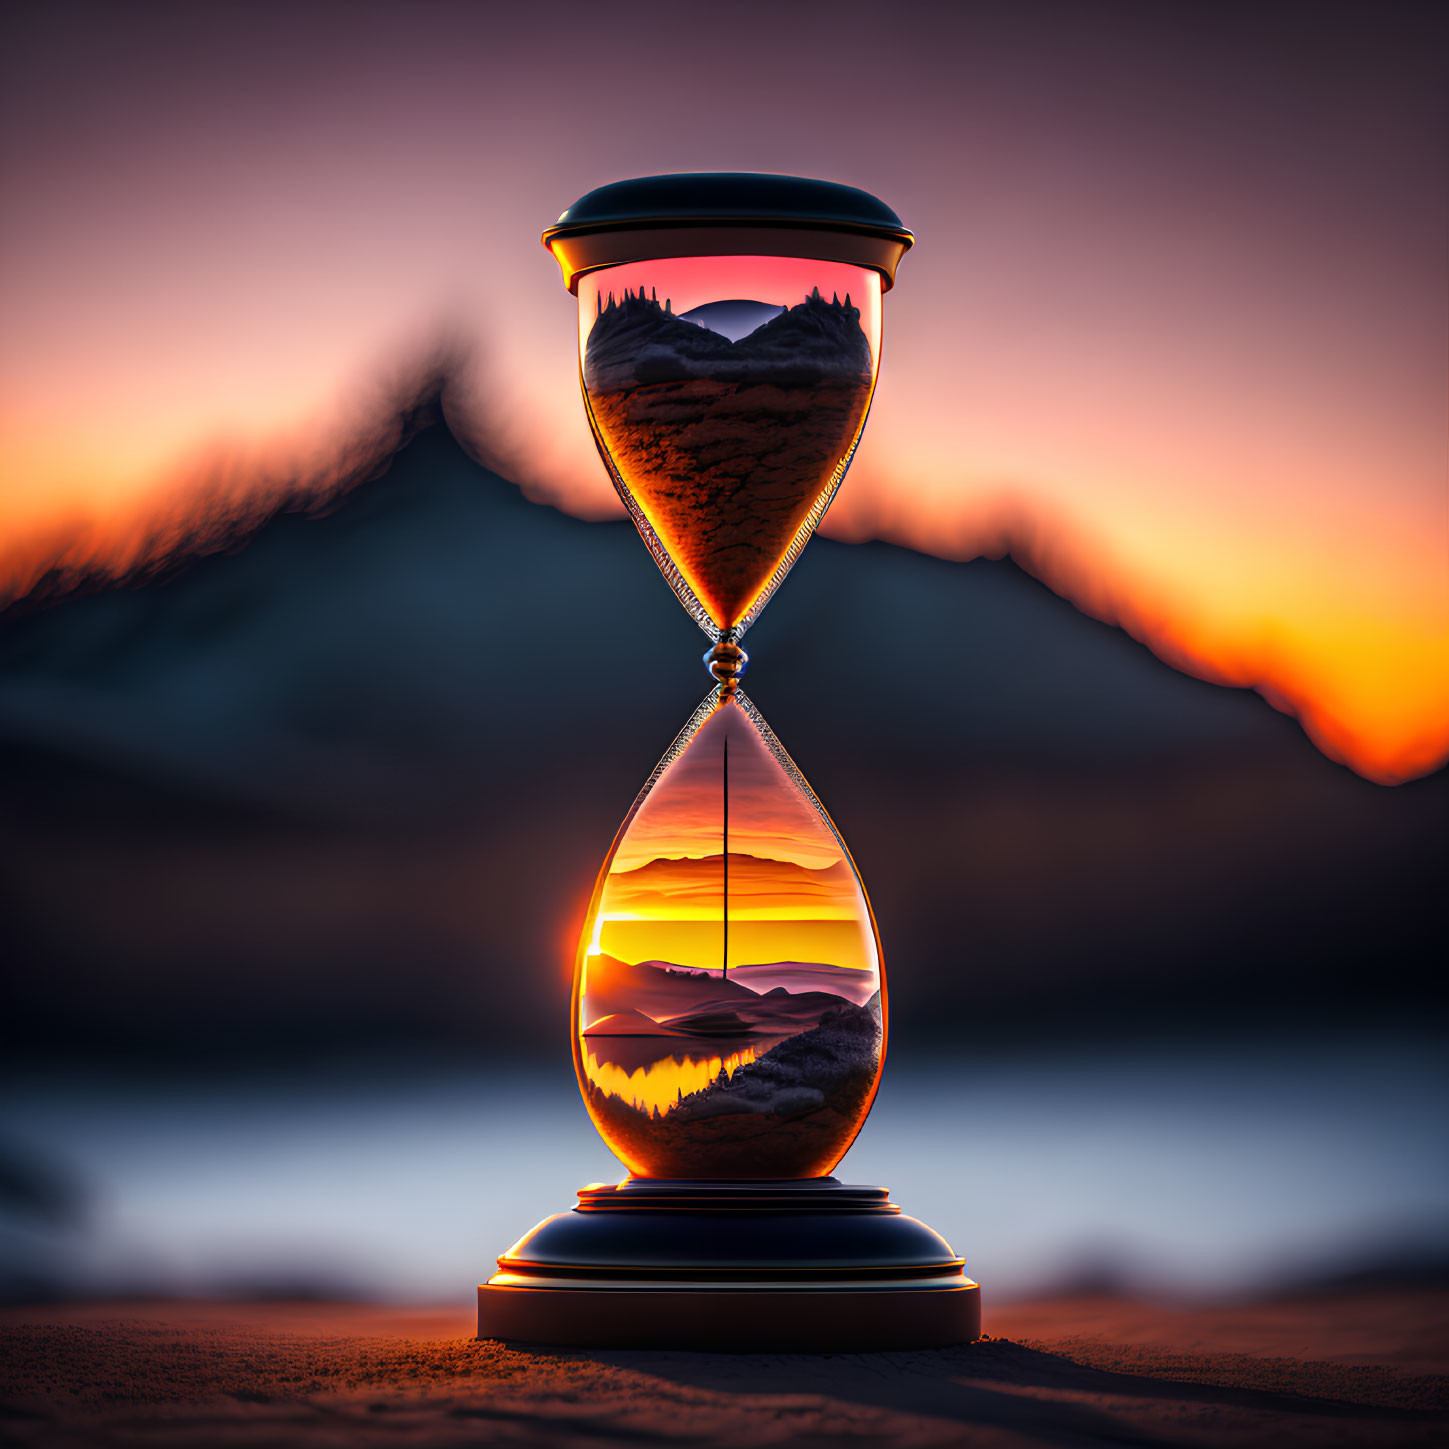 Hourglass on sandy surface with mountain landscape and sunset sky